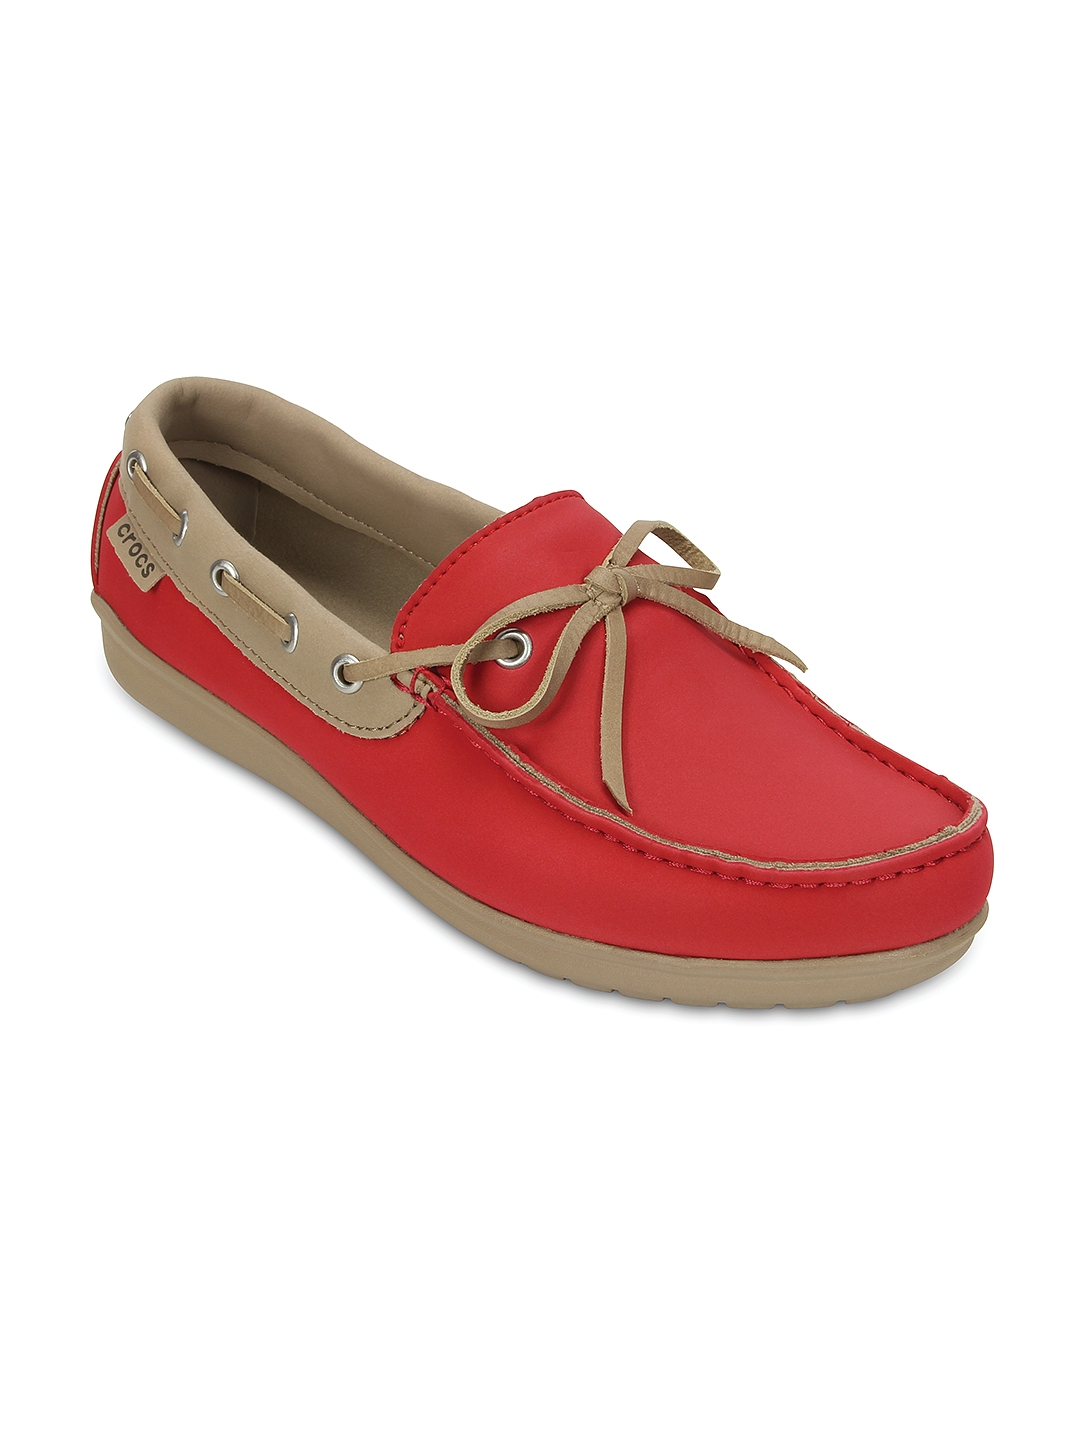 Buy Crocs Wrap Colorlite Women Red Boat Shoes - Casual Shoes for Women ...